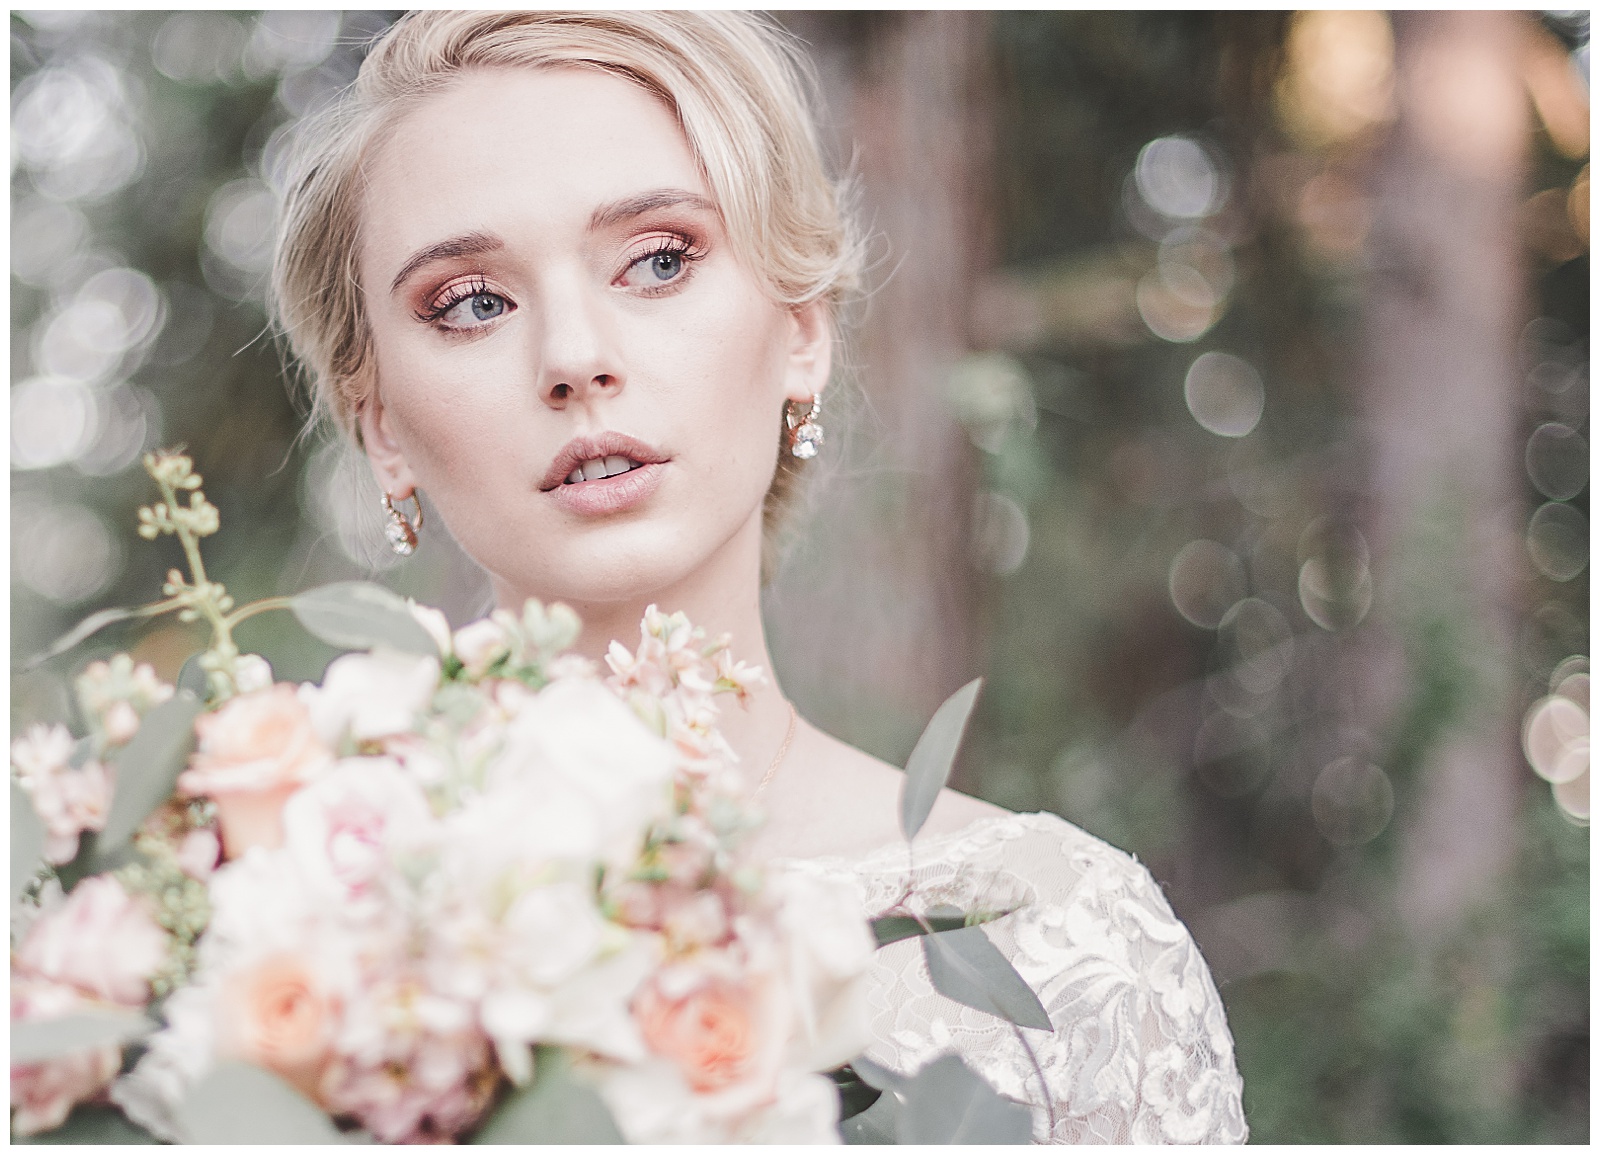 Bridal beauty answers from the experts